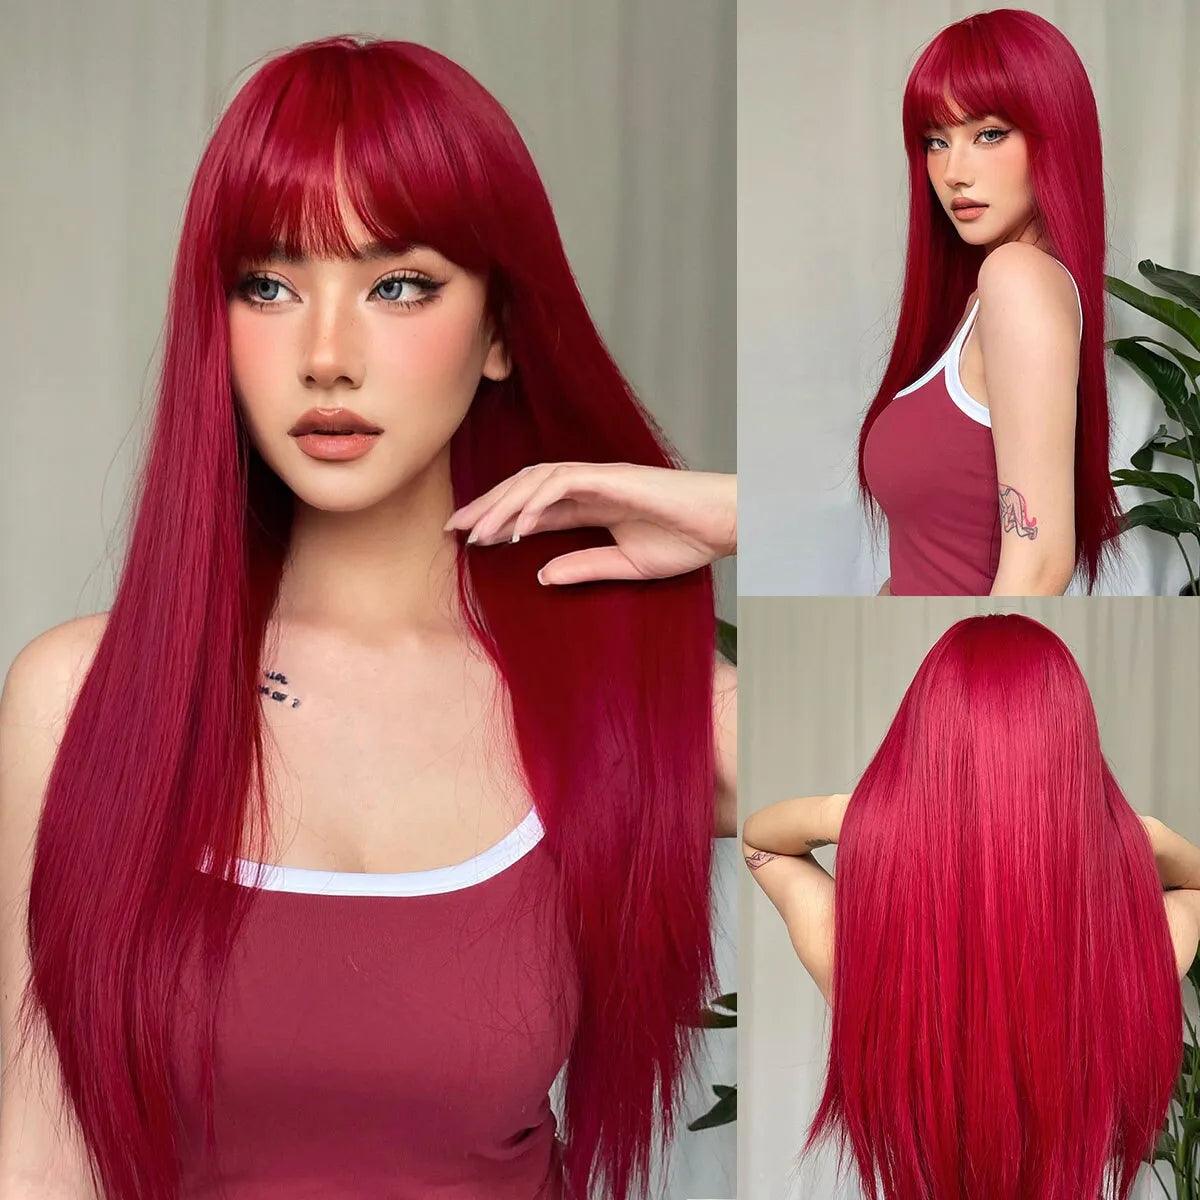 Vibrant Light Wine Red Cosplay Wig with Bangs - Long Straight Hair for Women - Heat Resistant & Versatile  ourlum.com   